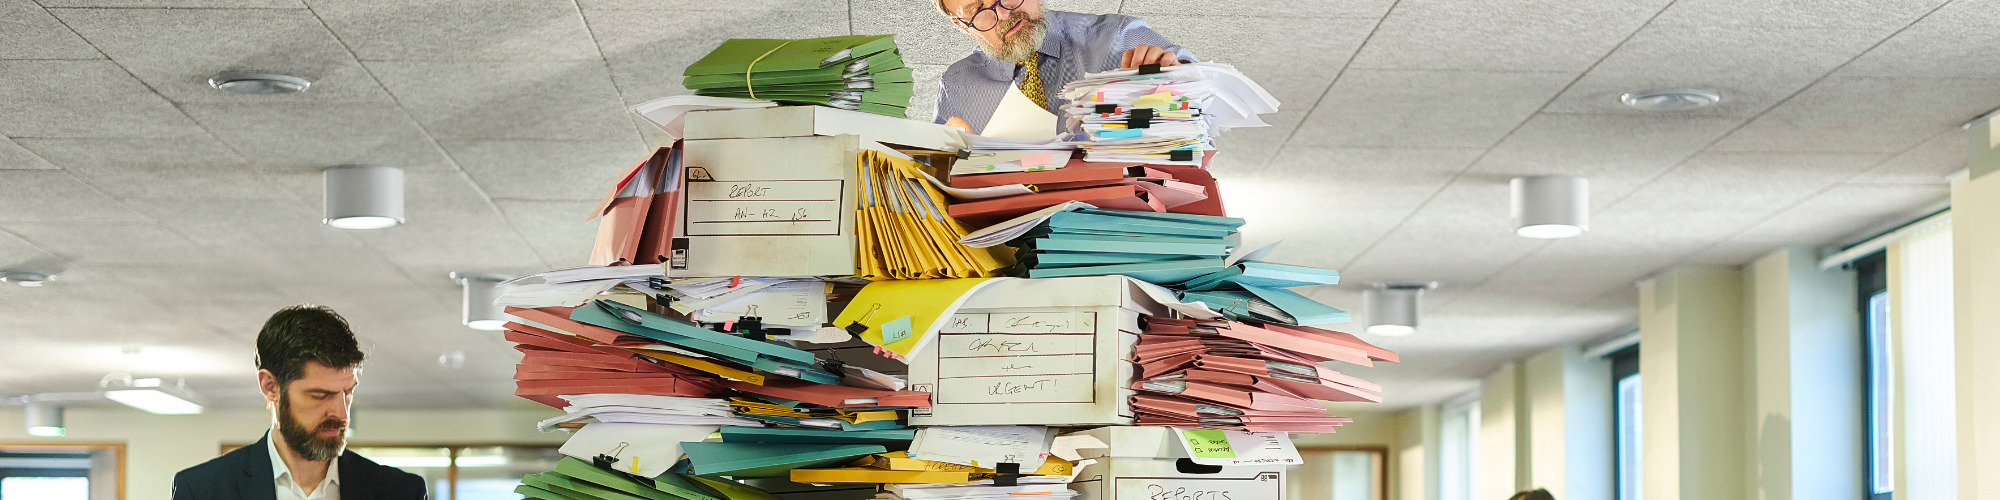 File Management for Law Firms - How to Minimise the Risk